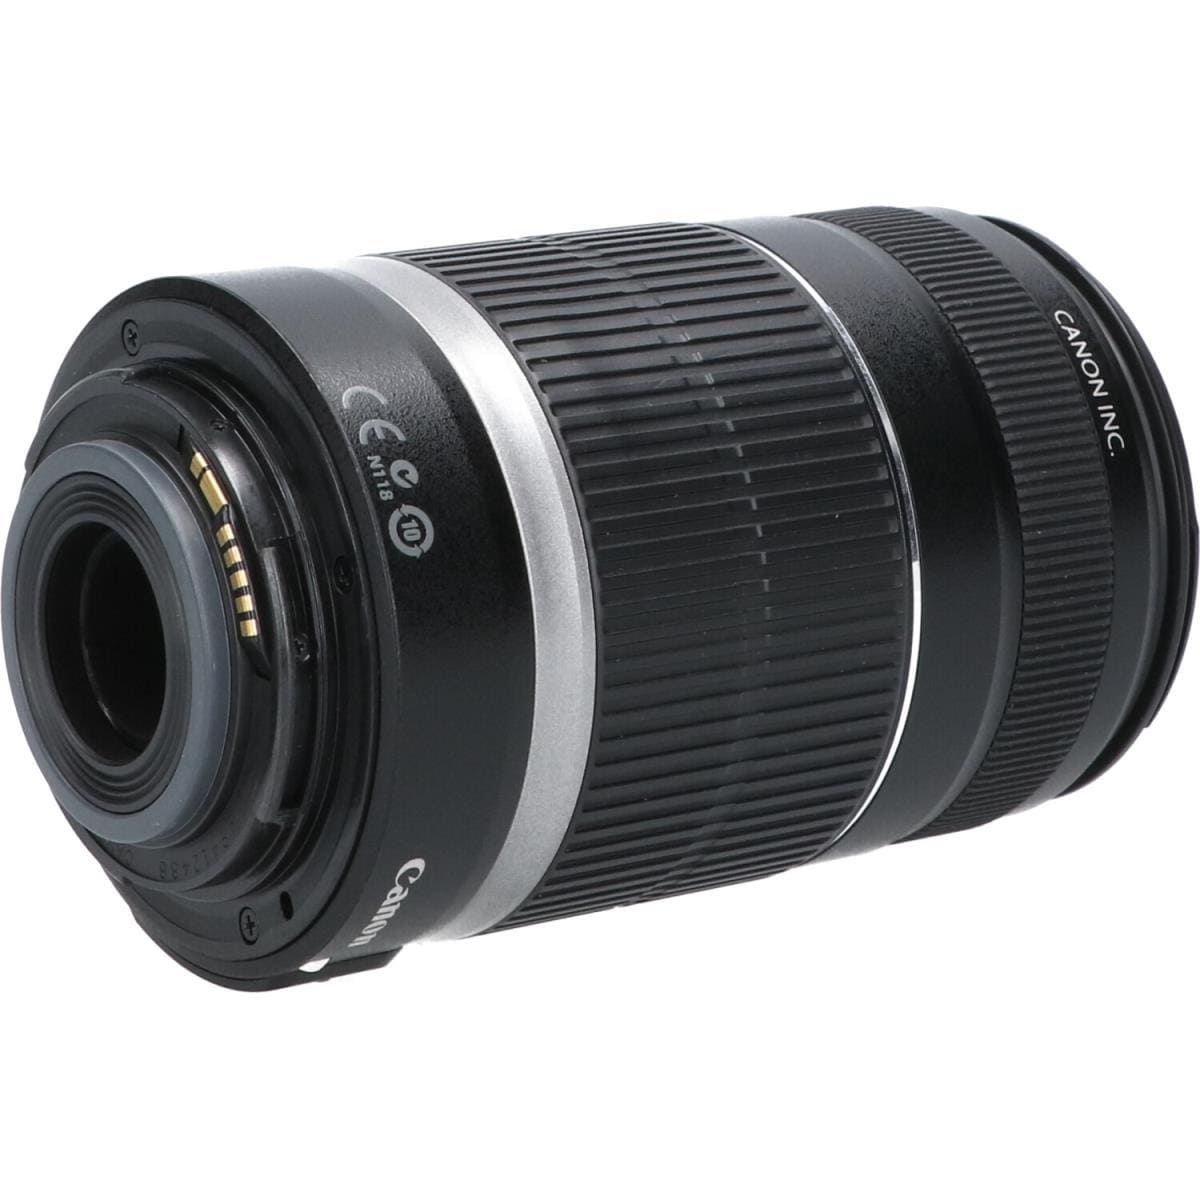 CANON EF-S55-250mm F4-5.6IS